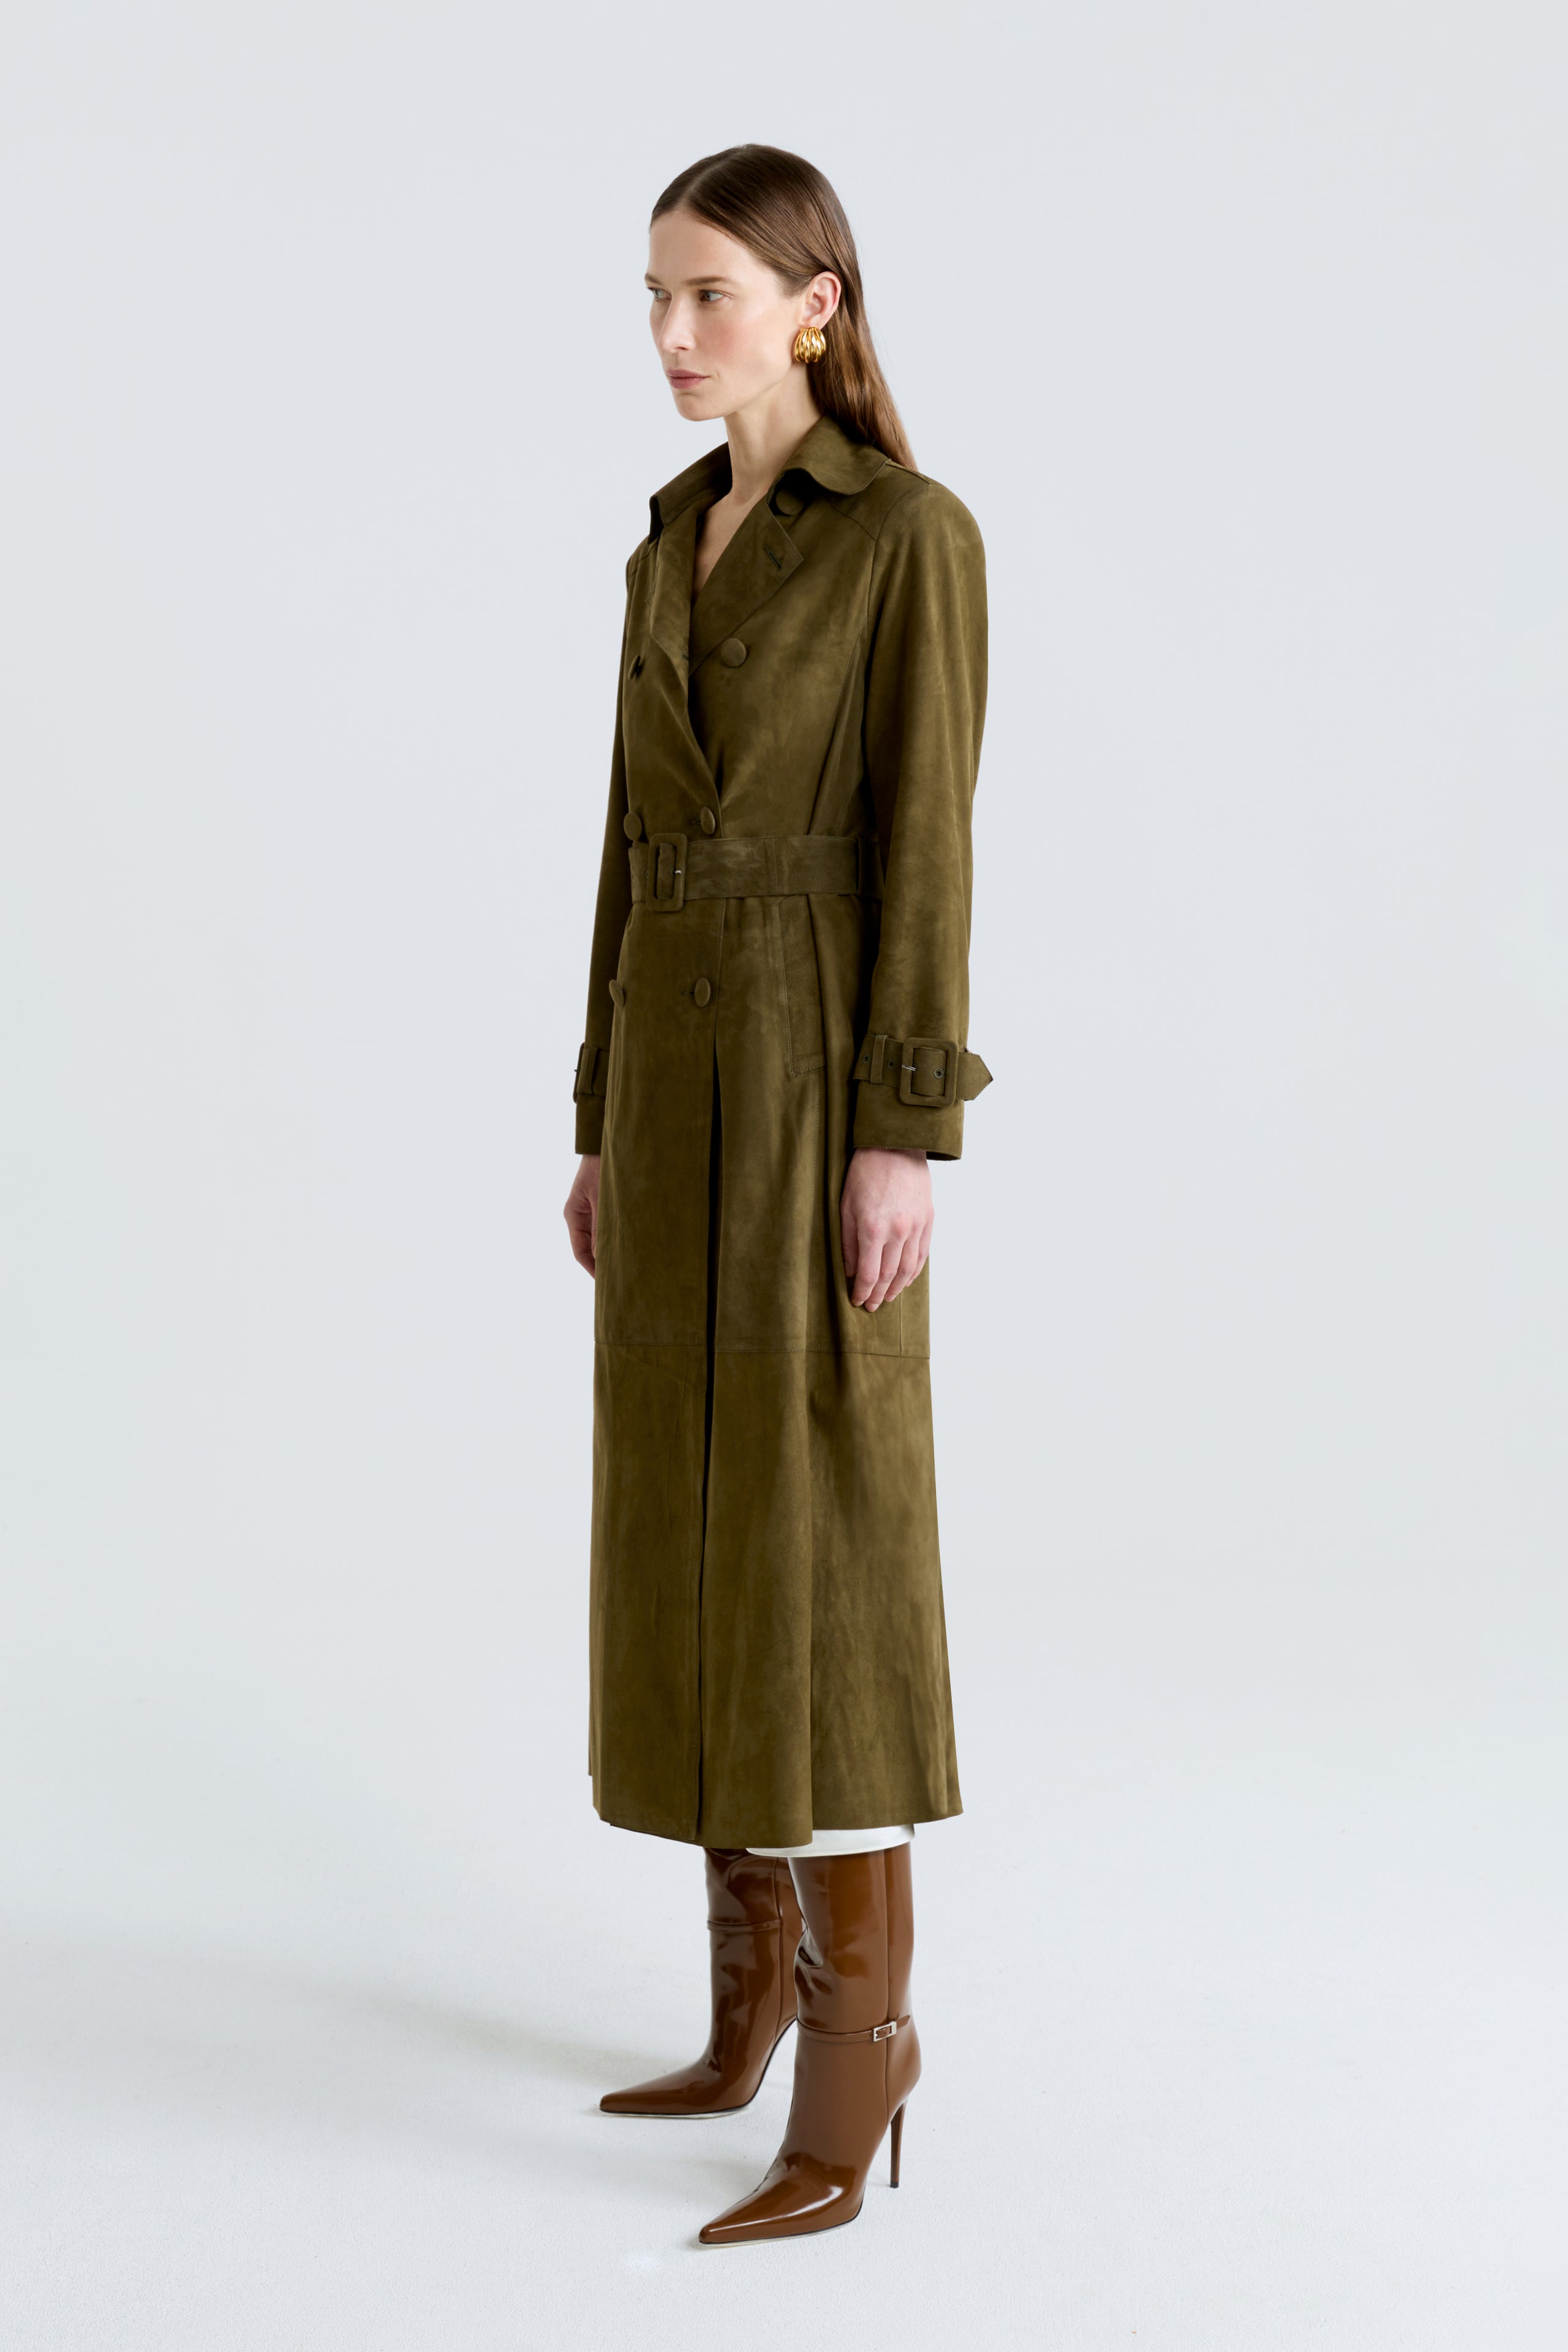 Model is wearing the Tate Olive Everyday Suede Trench Coat Side